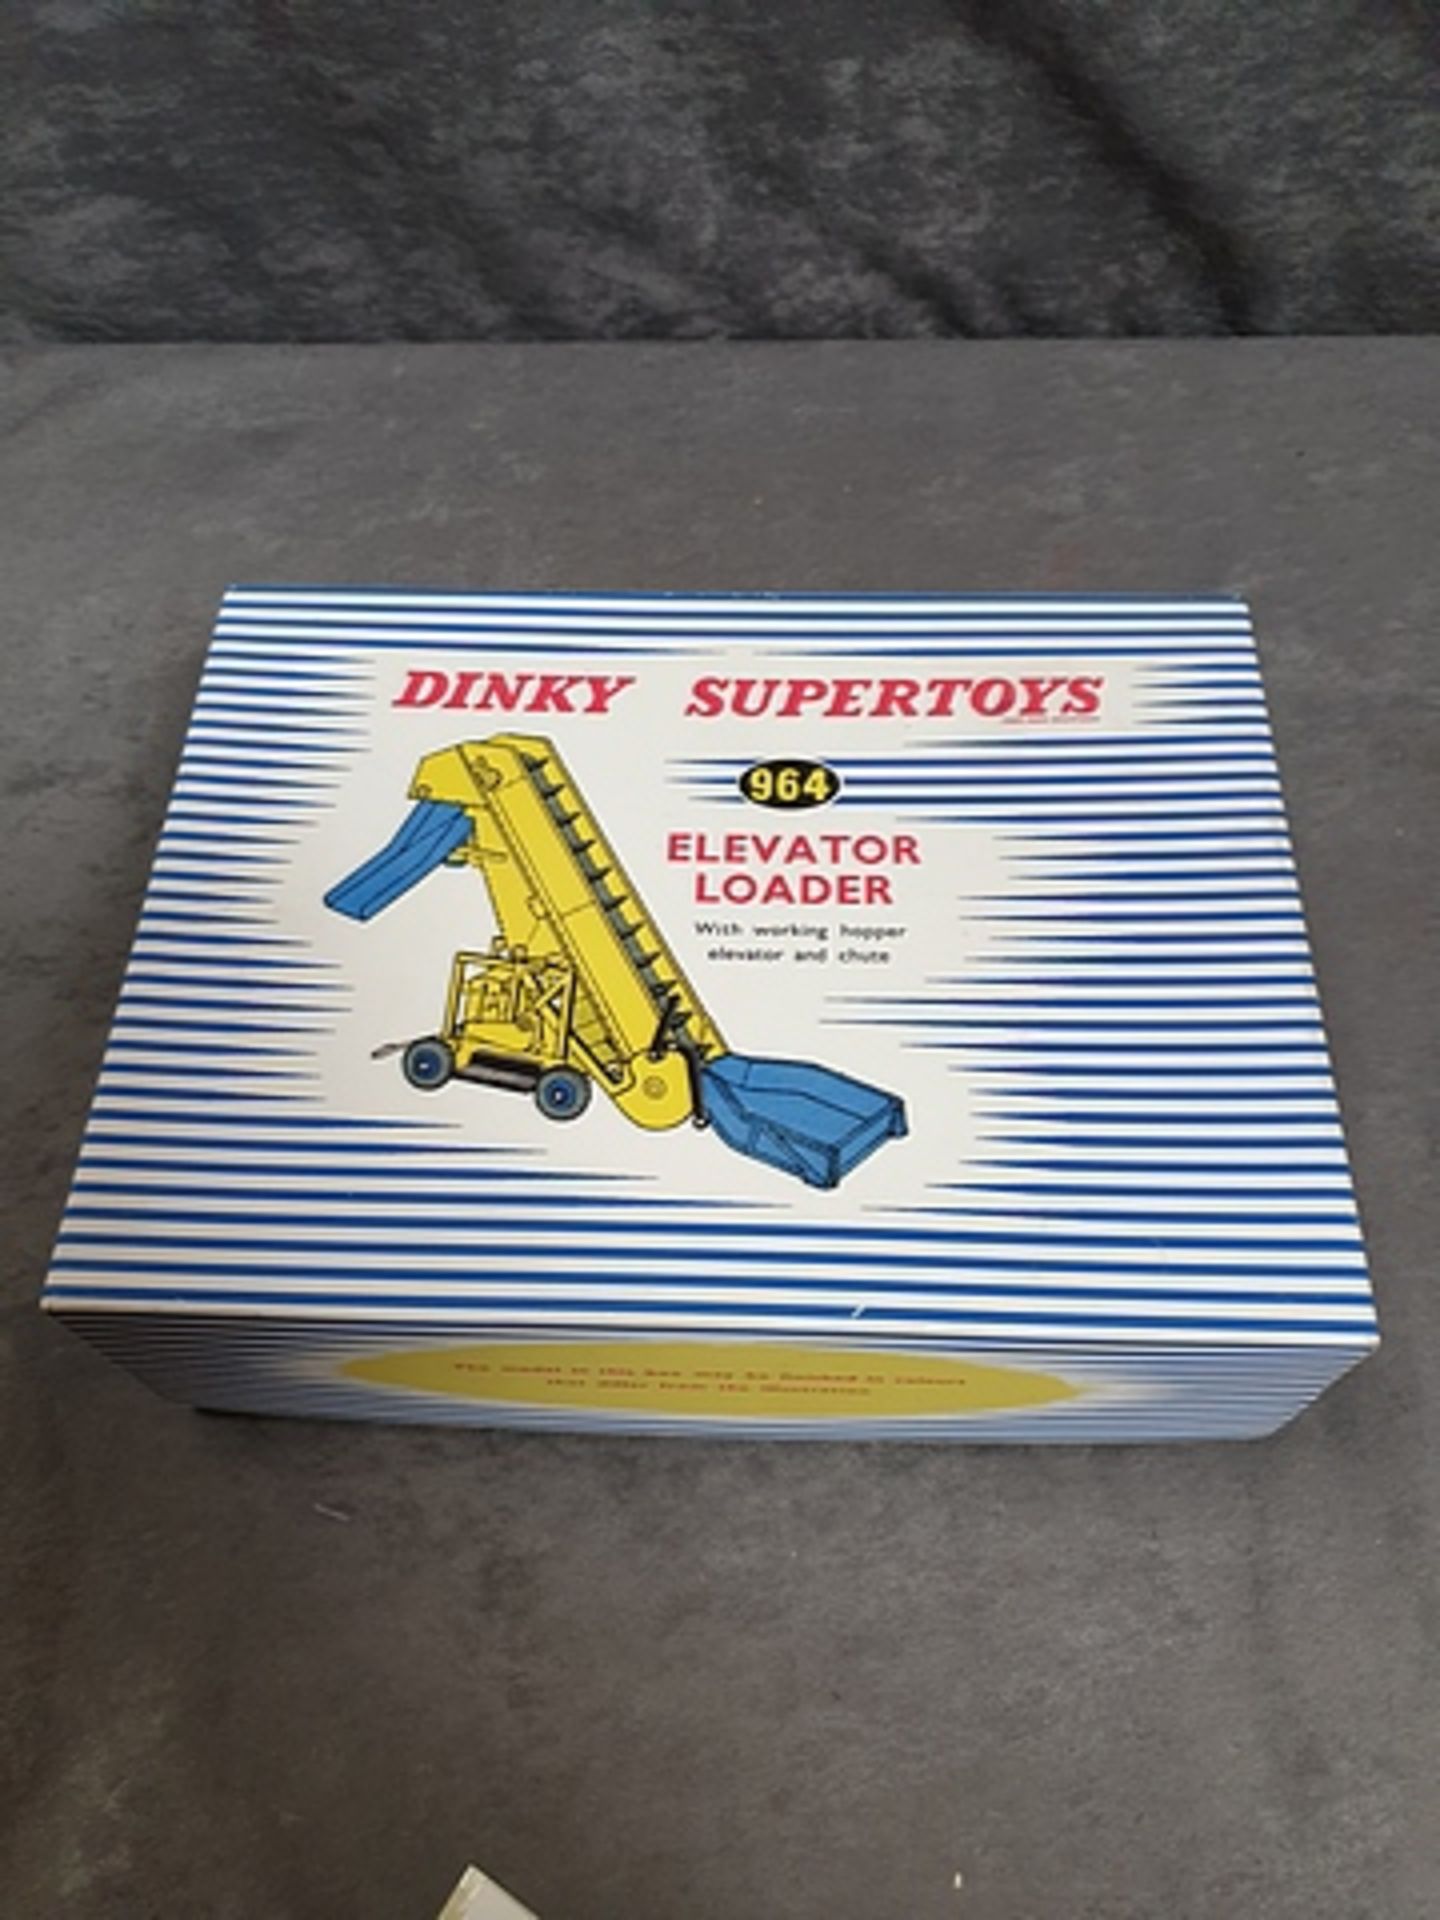 Dinky Diecast Toys #964 Elevator Loader in a repro Box - Image 2 of 2